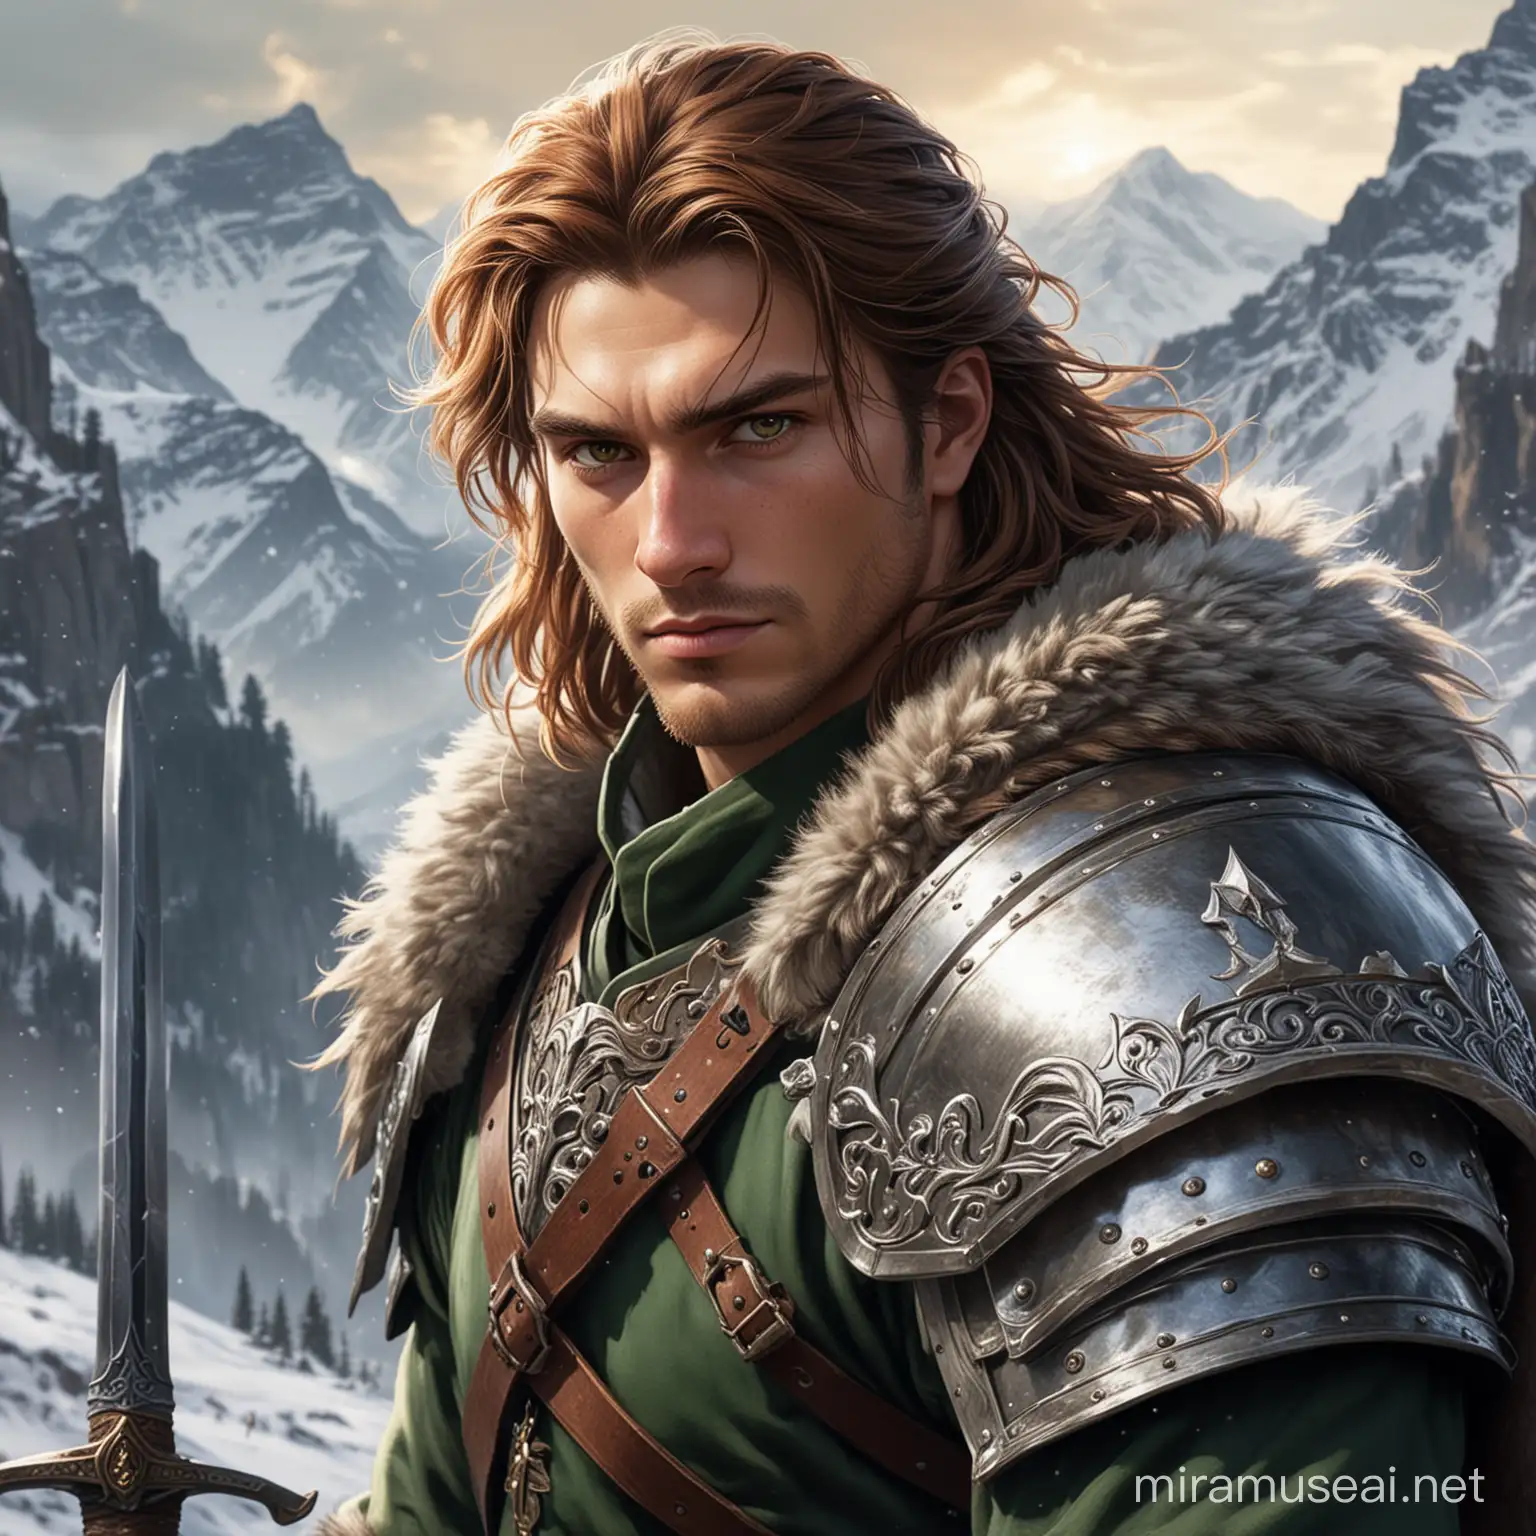 noble, proud, cocky, greatsword over one shoulder, winter mountain background, medium/long brown hair, dark green eyes, male.
